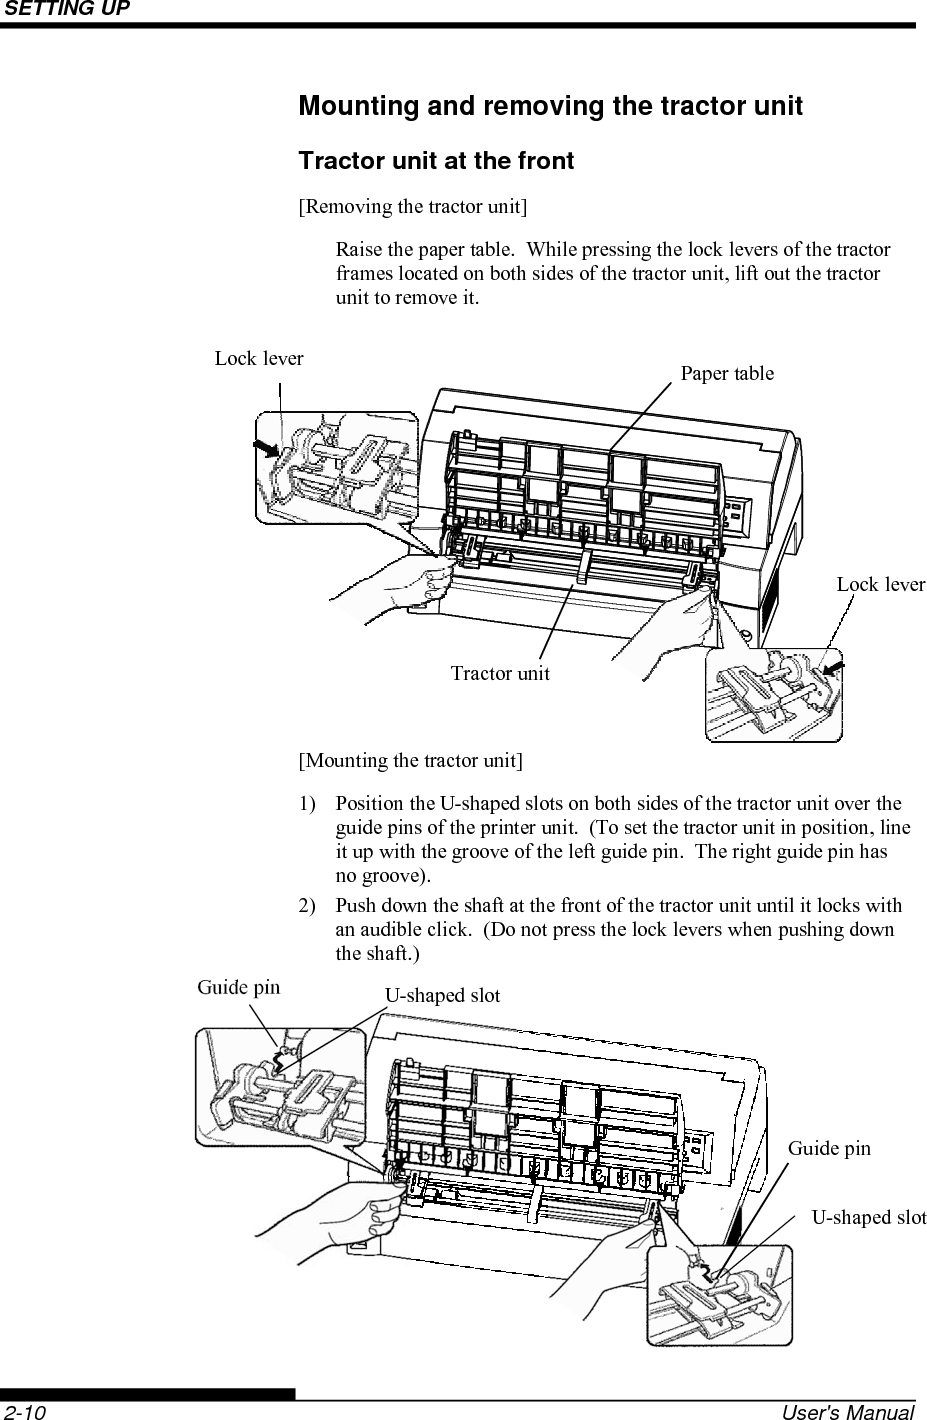 SETTING UP    2-10  User&apos;s Manual Mounting and removing the tractor unit Tractor unit at the front [Removing the tractor unit] Raise the paper table.  While pressing the lock levers of the tractor frames located on both sides of the tractor unit, lift out the tractor unit to remove it.           [Mounting the tractor unit] 1)  Position the U-shaped slots on both sides of the tractor unit over the guide pins of the printer unit.  (To set the tractor unit in position, line it up with the groove of the left guide pin.  The right guide pin has no groove). 2)  Push down the shaft at the front of the tractor unit until it locks with an audible click.  (Do not press the lock levers when pushing down the shaft.)       Lock lever Lock lever  Paper table Guide pin Guide pin U-shaped slotU-shaped slotTractor unit 